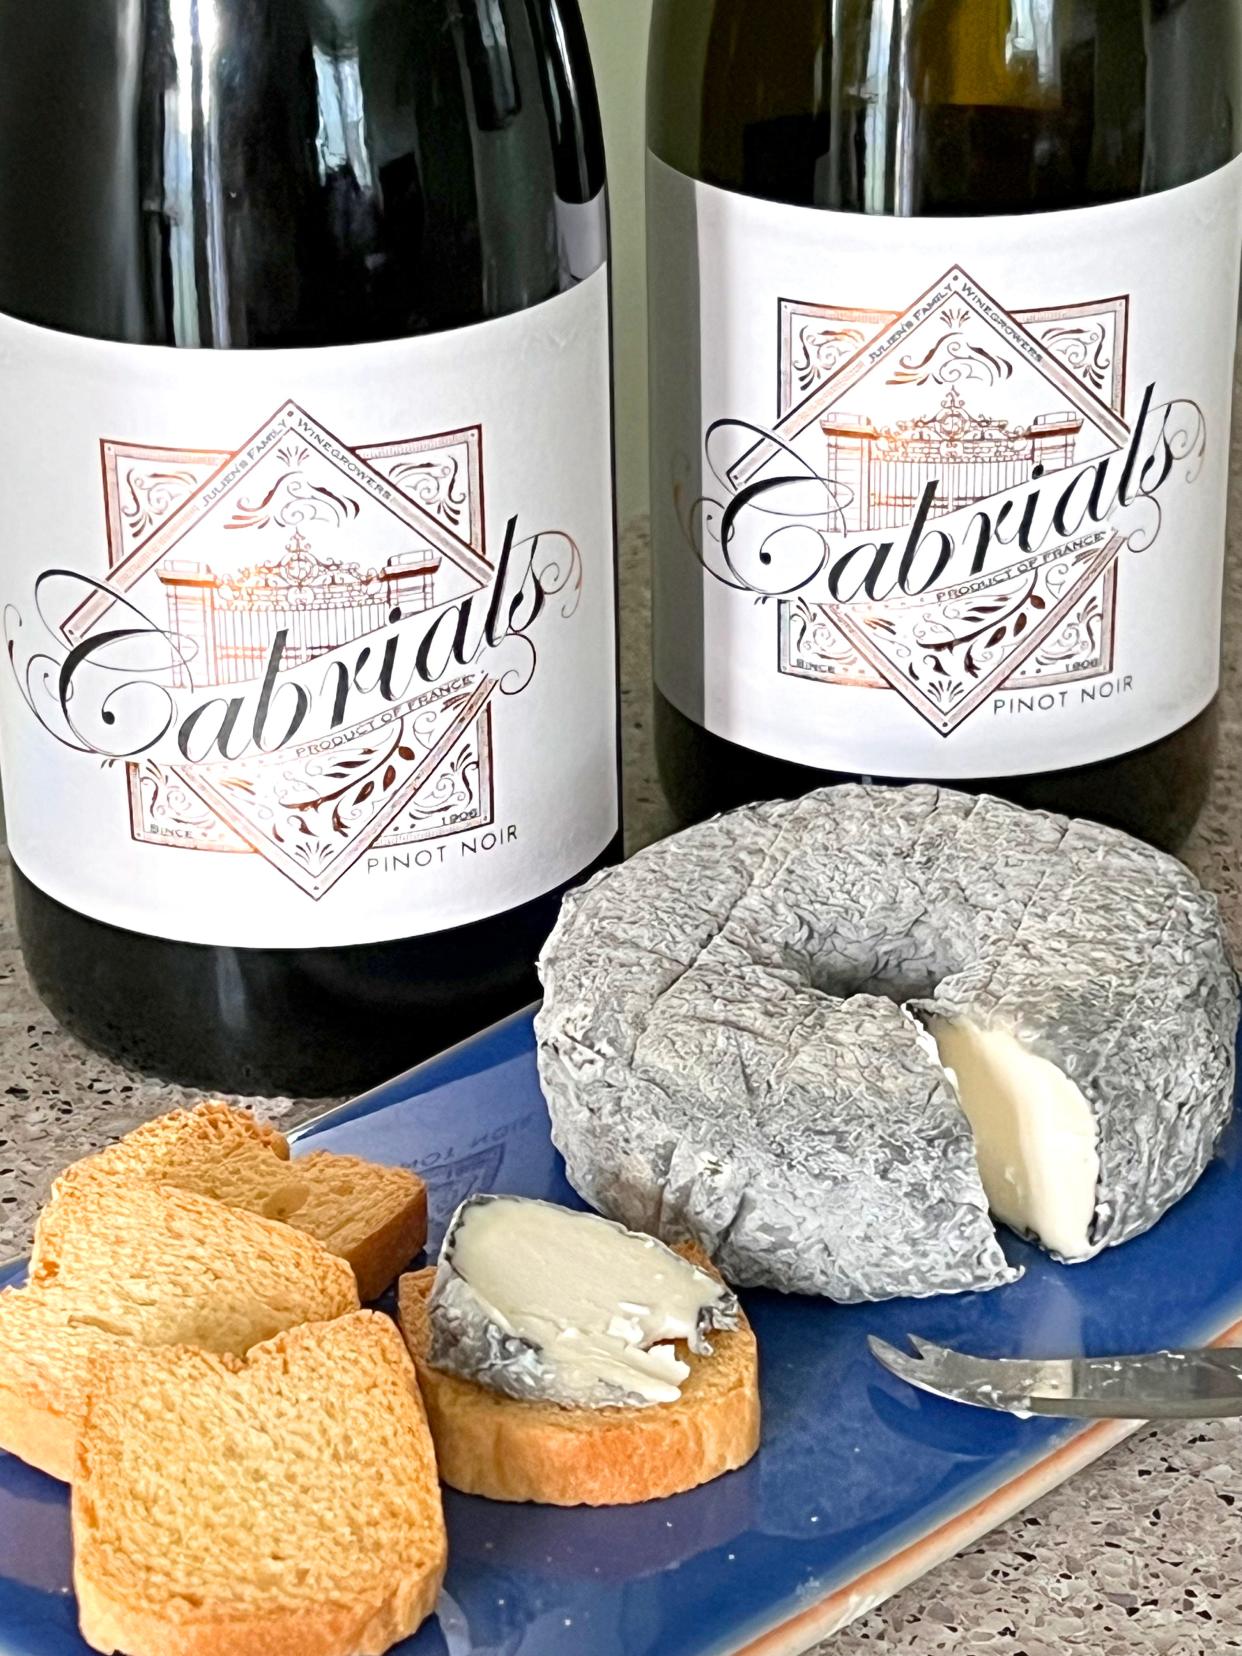 Couronne de Reines goat cheese, a surprise gift from my sister, was exceptional to nibble on with a glass of Domaine de Cabrials pinot noir from France.